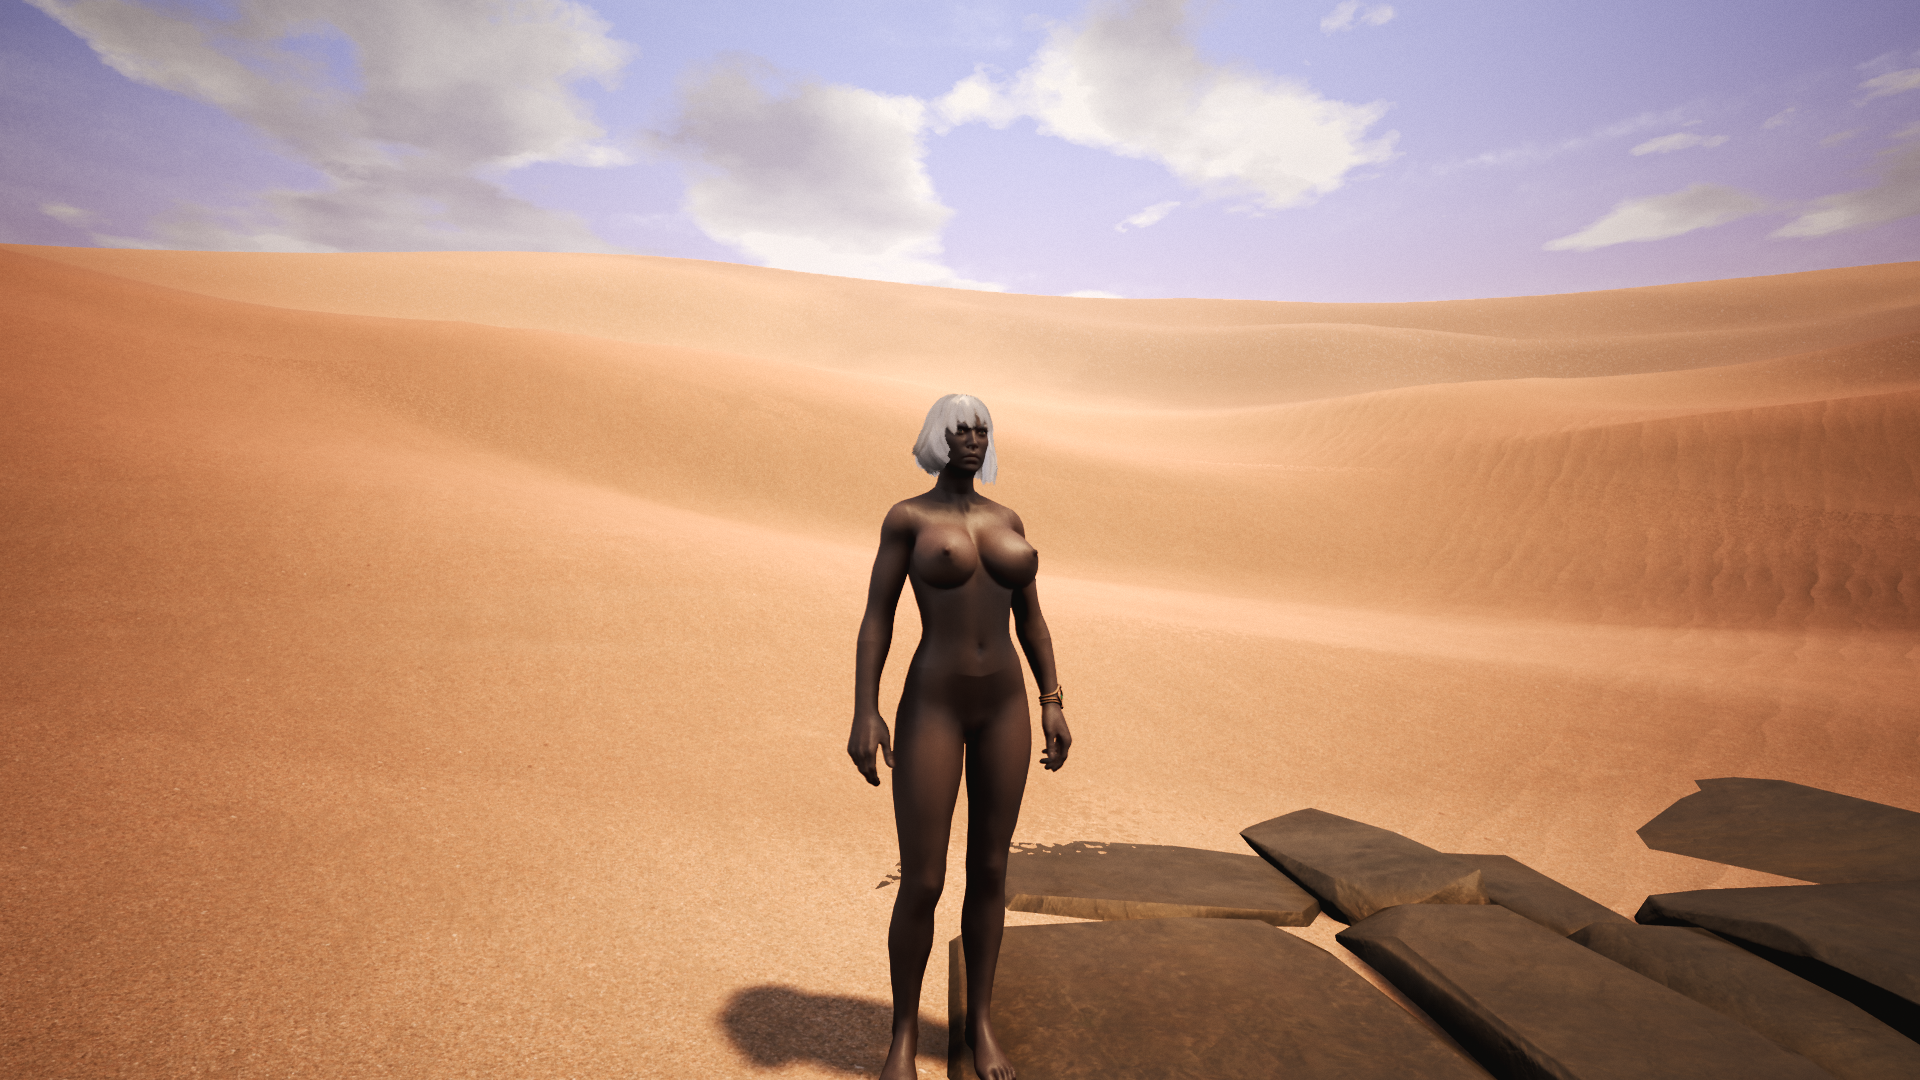 Wip Conan Exiles New Female Body Vagina Nipples Source Mod File Page 6 Adult Gaming